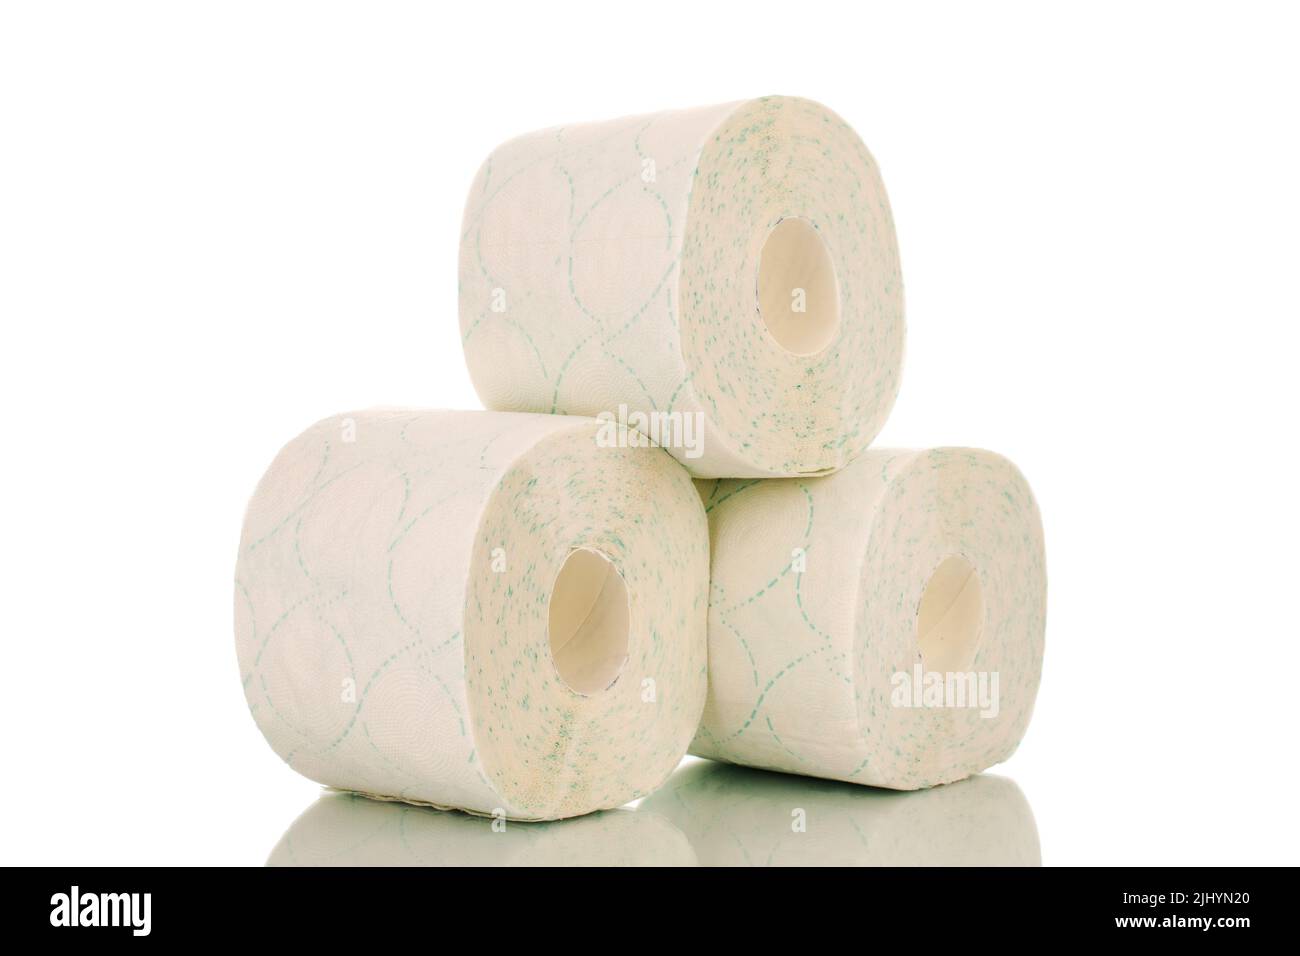 Three rolls of toilet paper, close-up, isolated on a white background Stock Photo